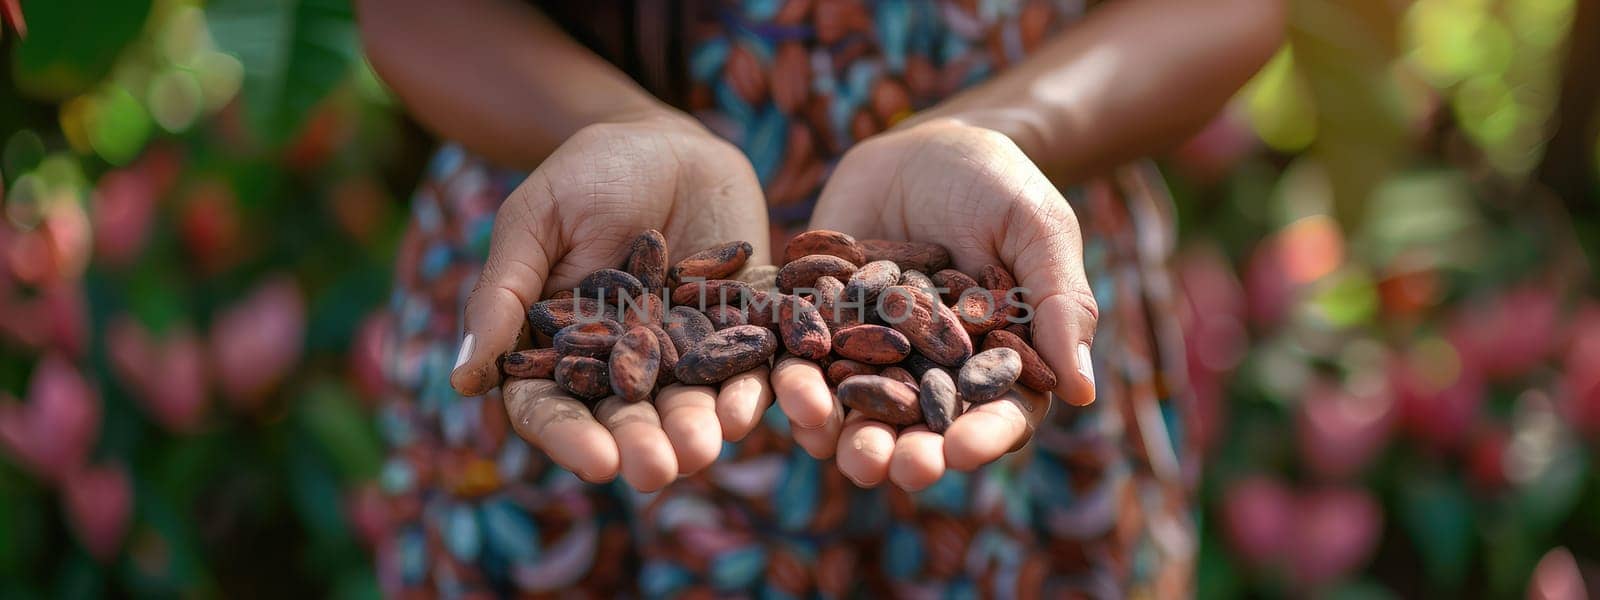 Cocoa beans harvest in the hands of a woman. Selective focus. nature.